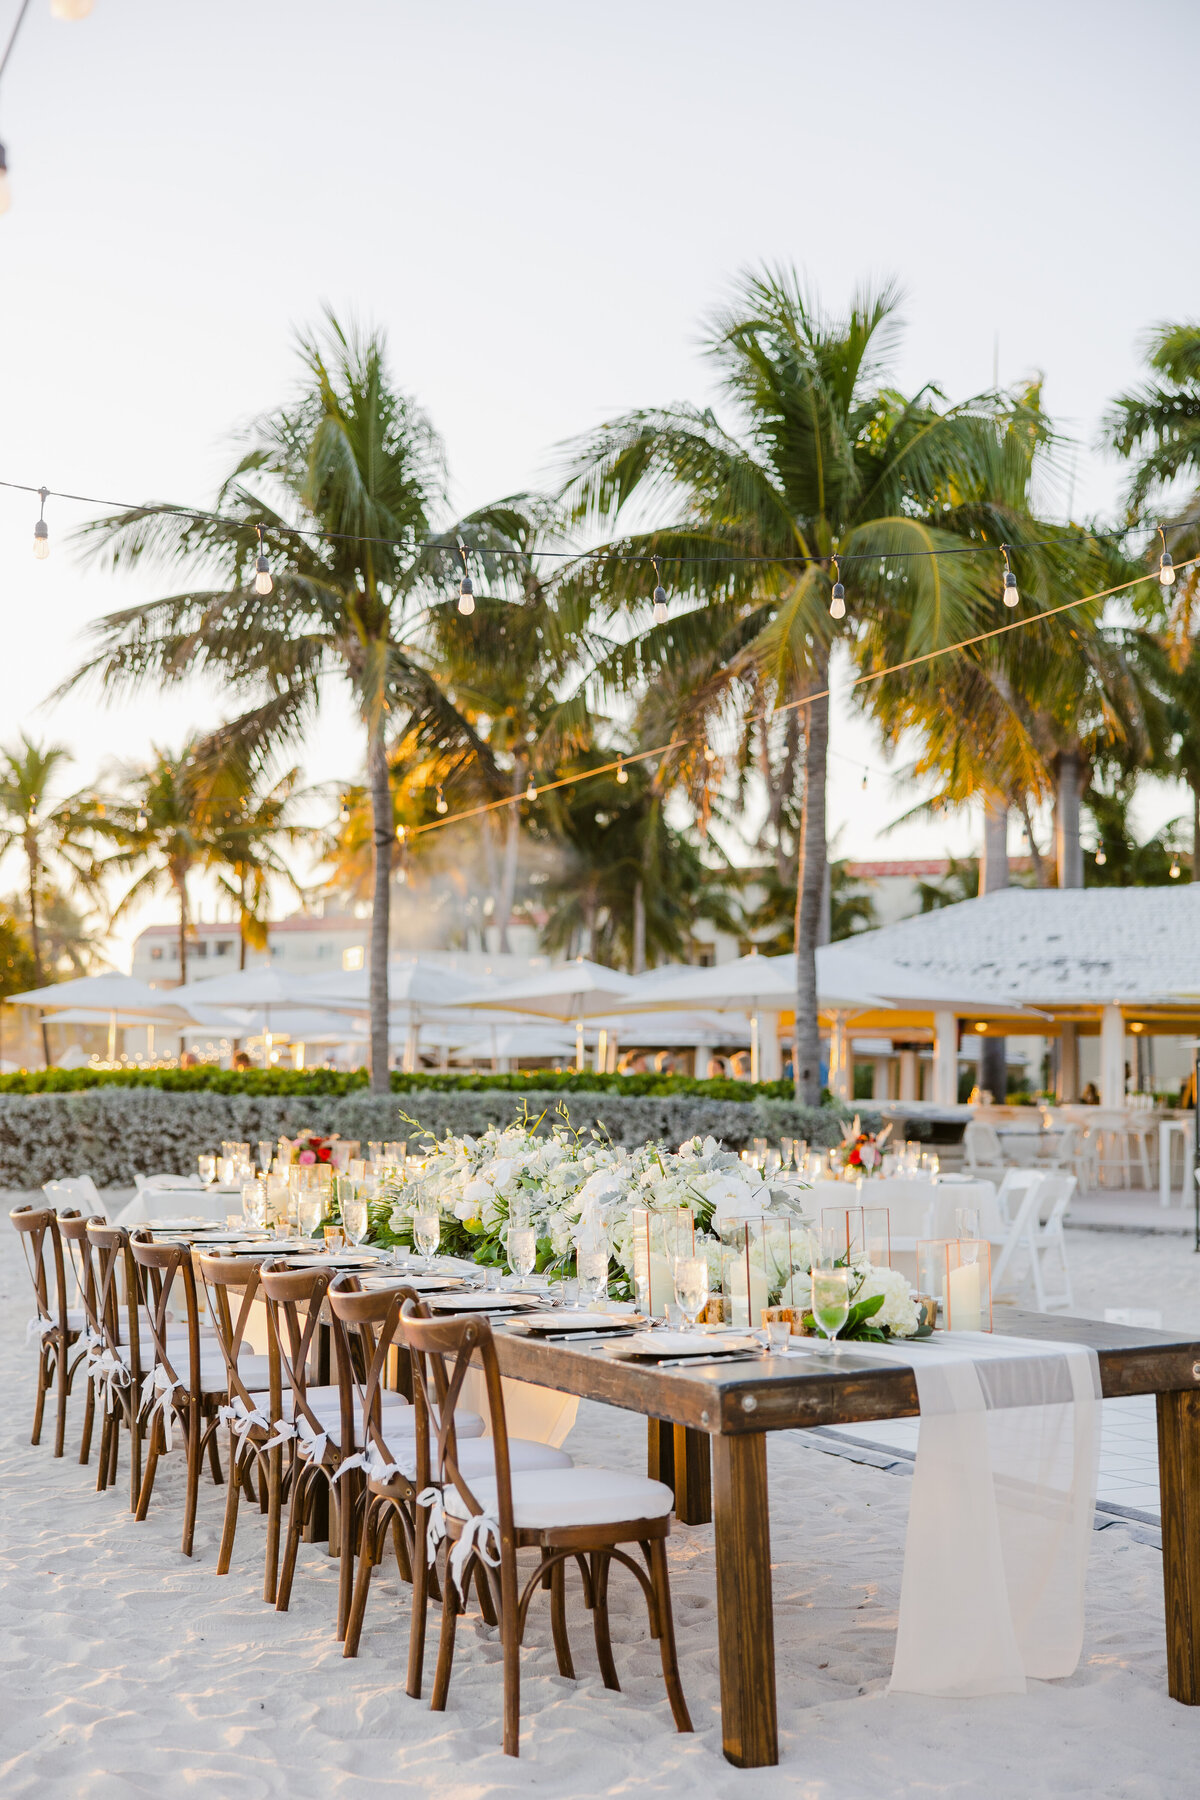 Outdoor dining setup on a beach at sunset with wooden tables, floral decorations, and string lights amidst palm trees, captured by a Destination Wedding Photographer.